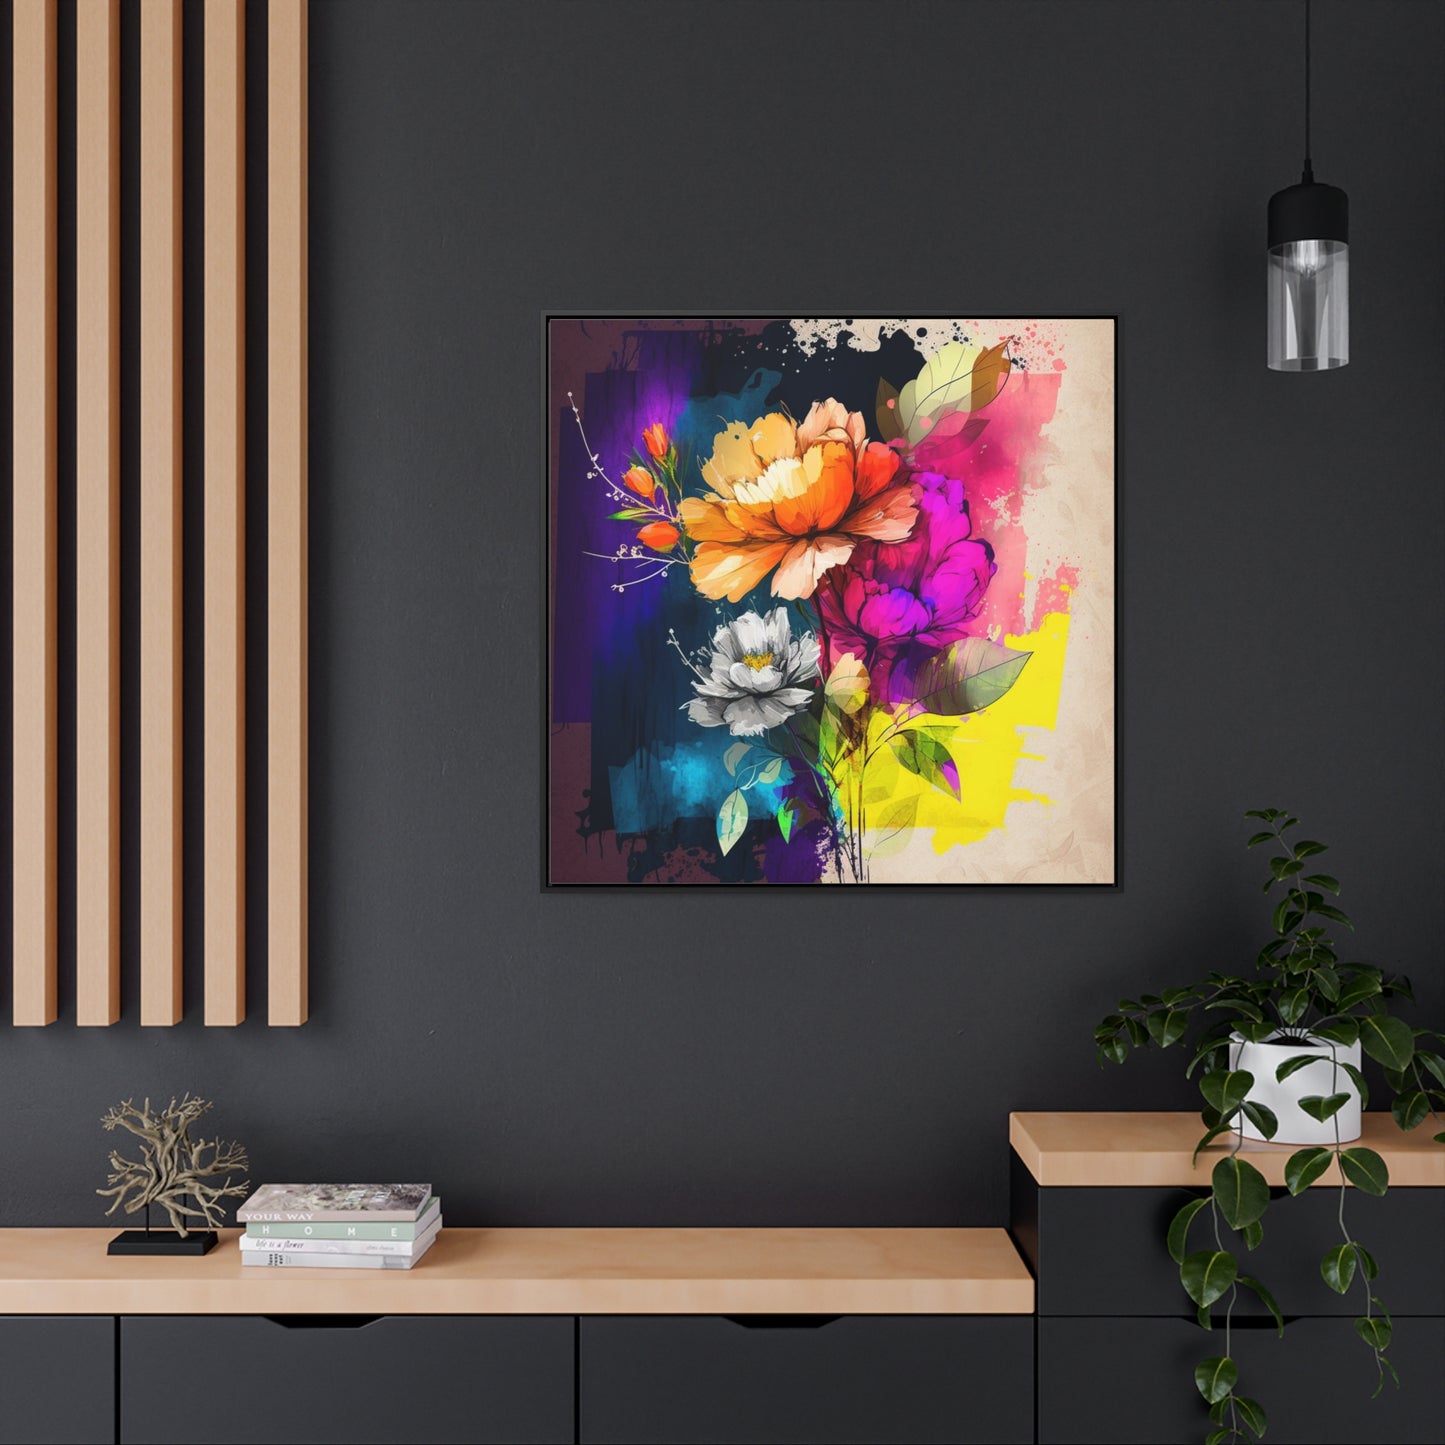 Gallery Canvas Wraps, Square Frame Bright Spring Flowers 4